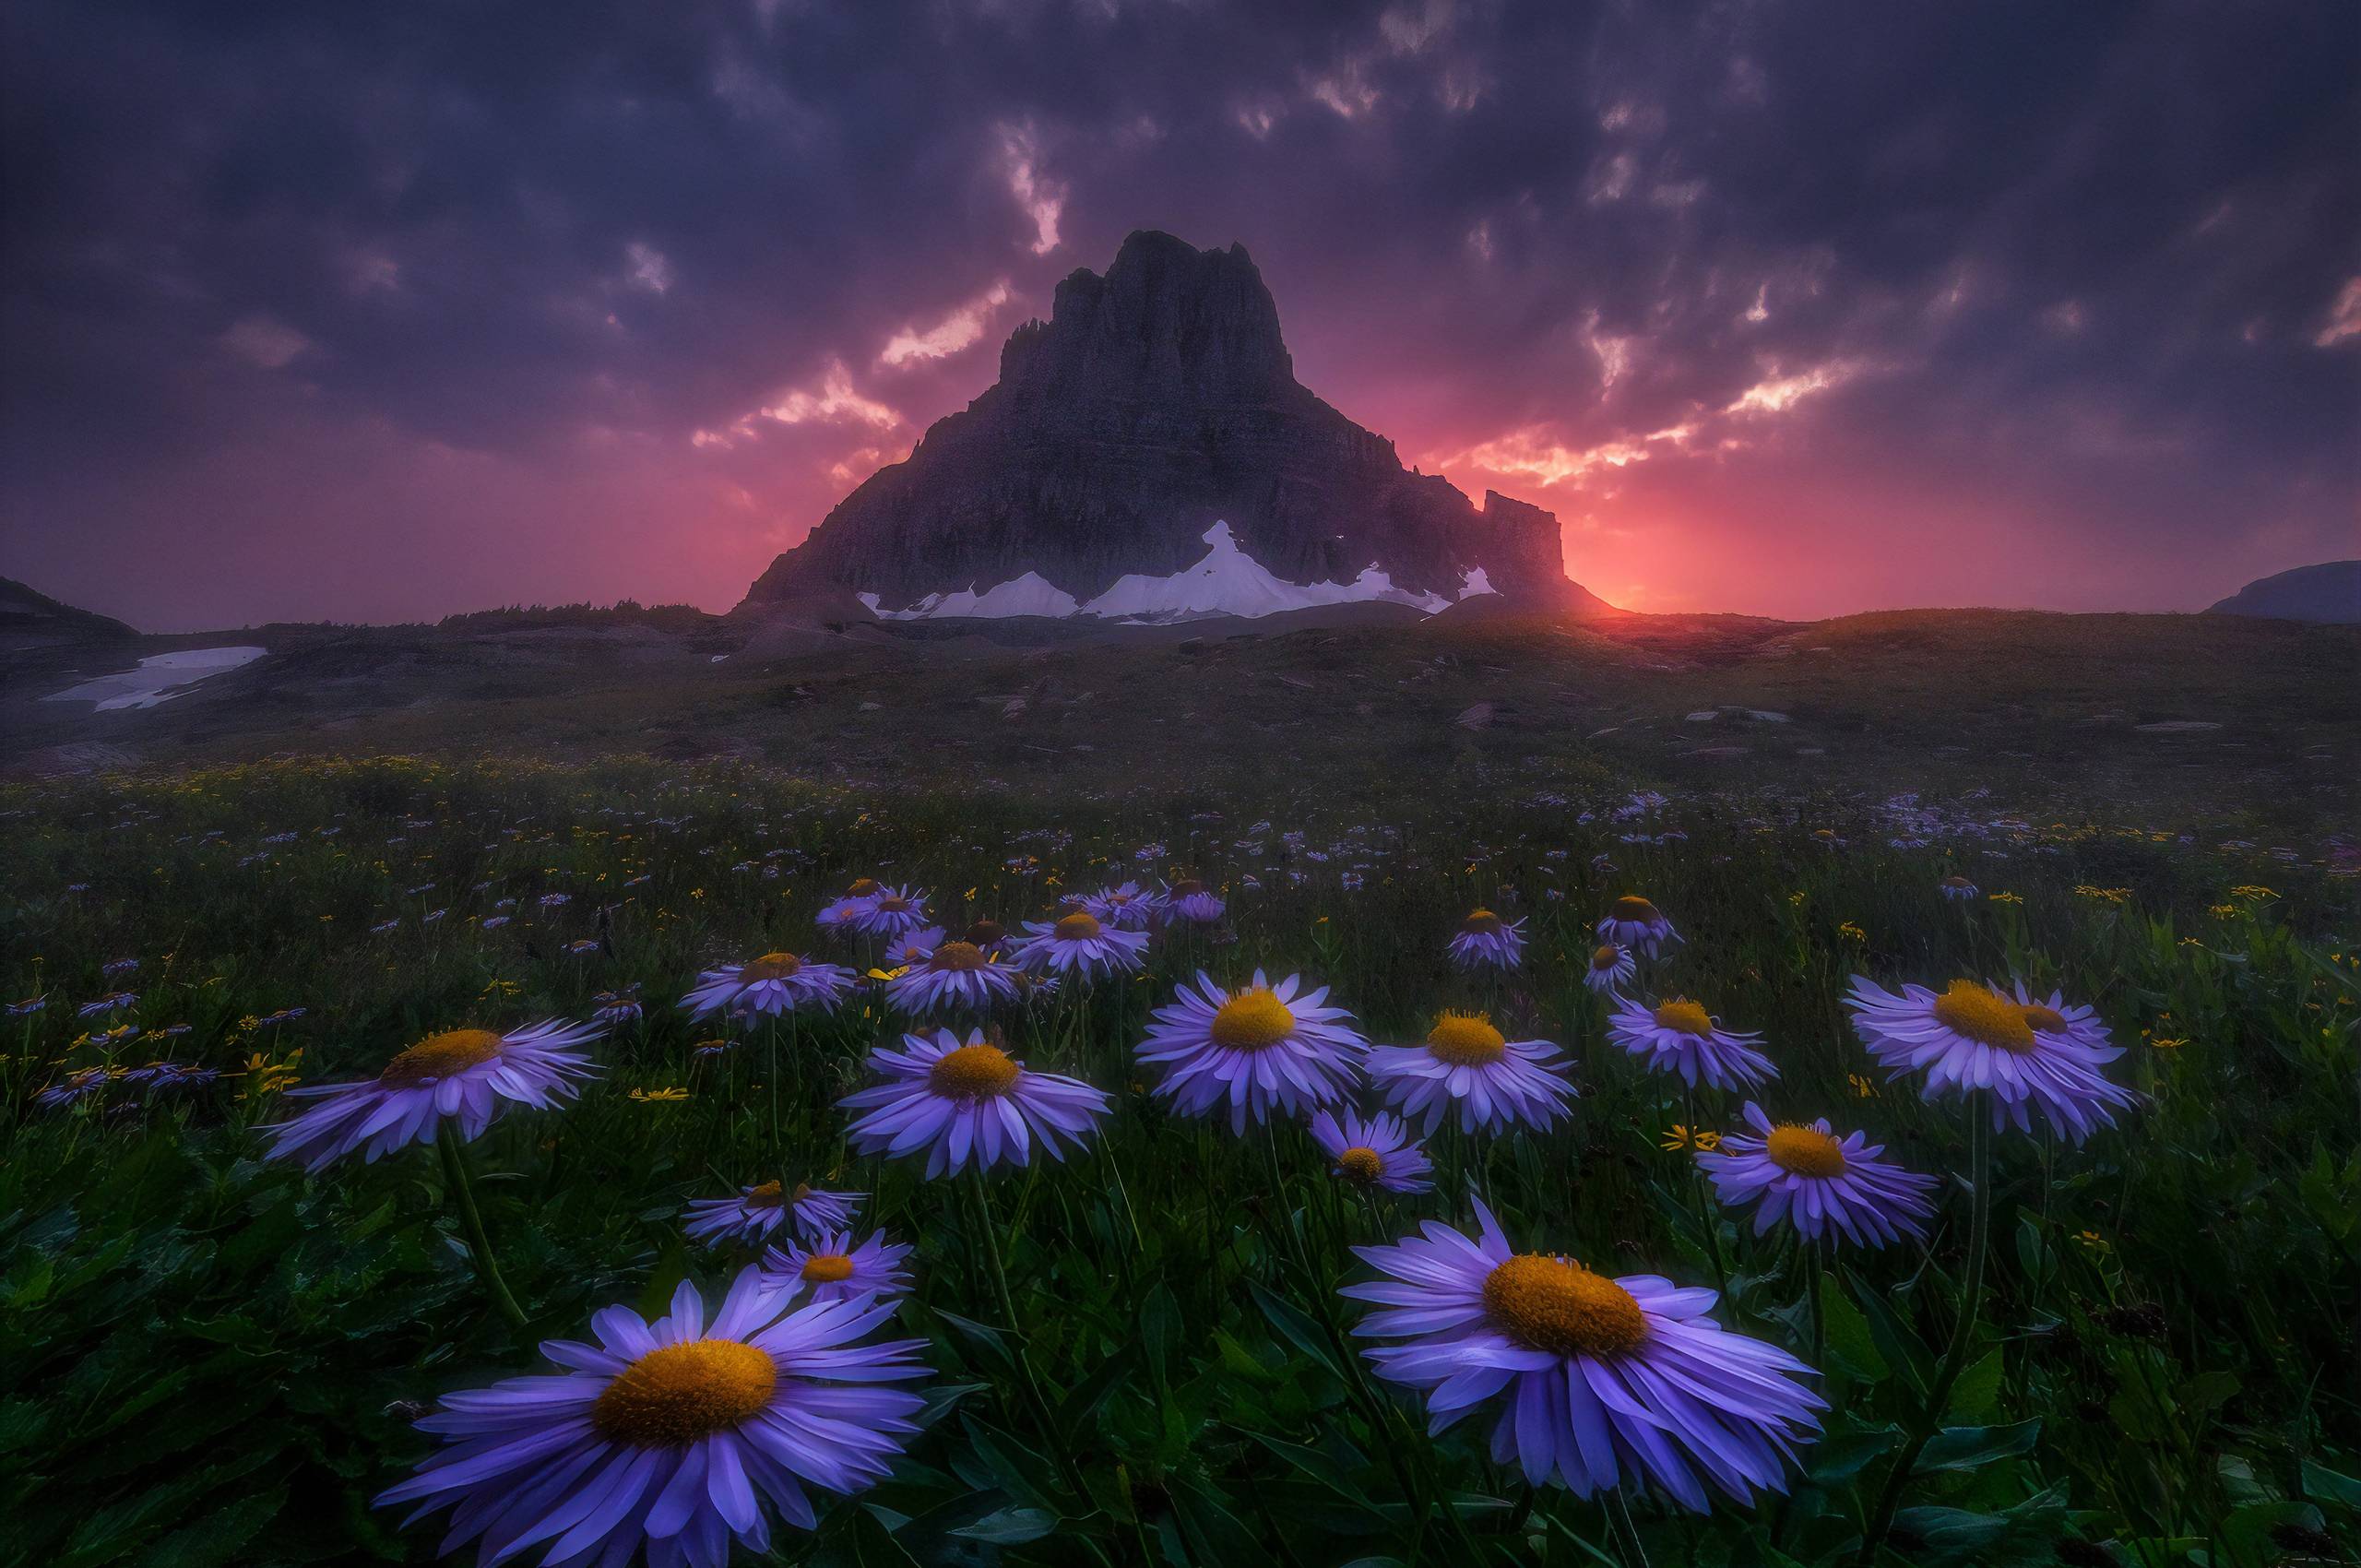 A field of purple flowers in front of a mountain with a sunset behind it. - Chromebook